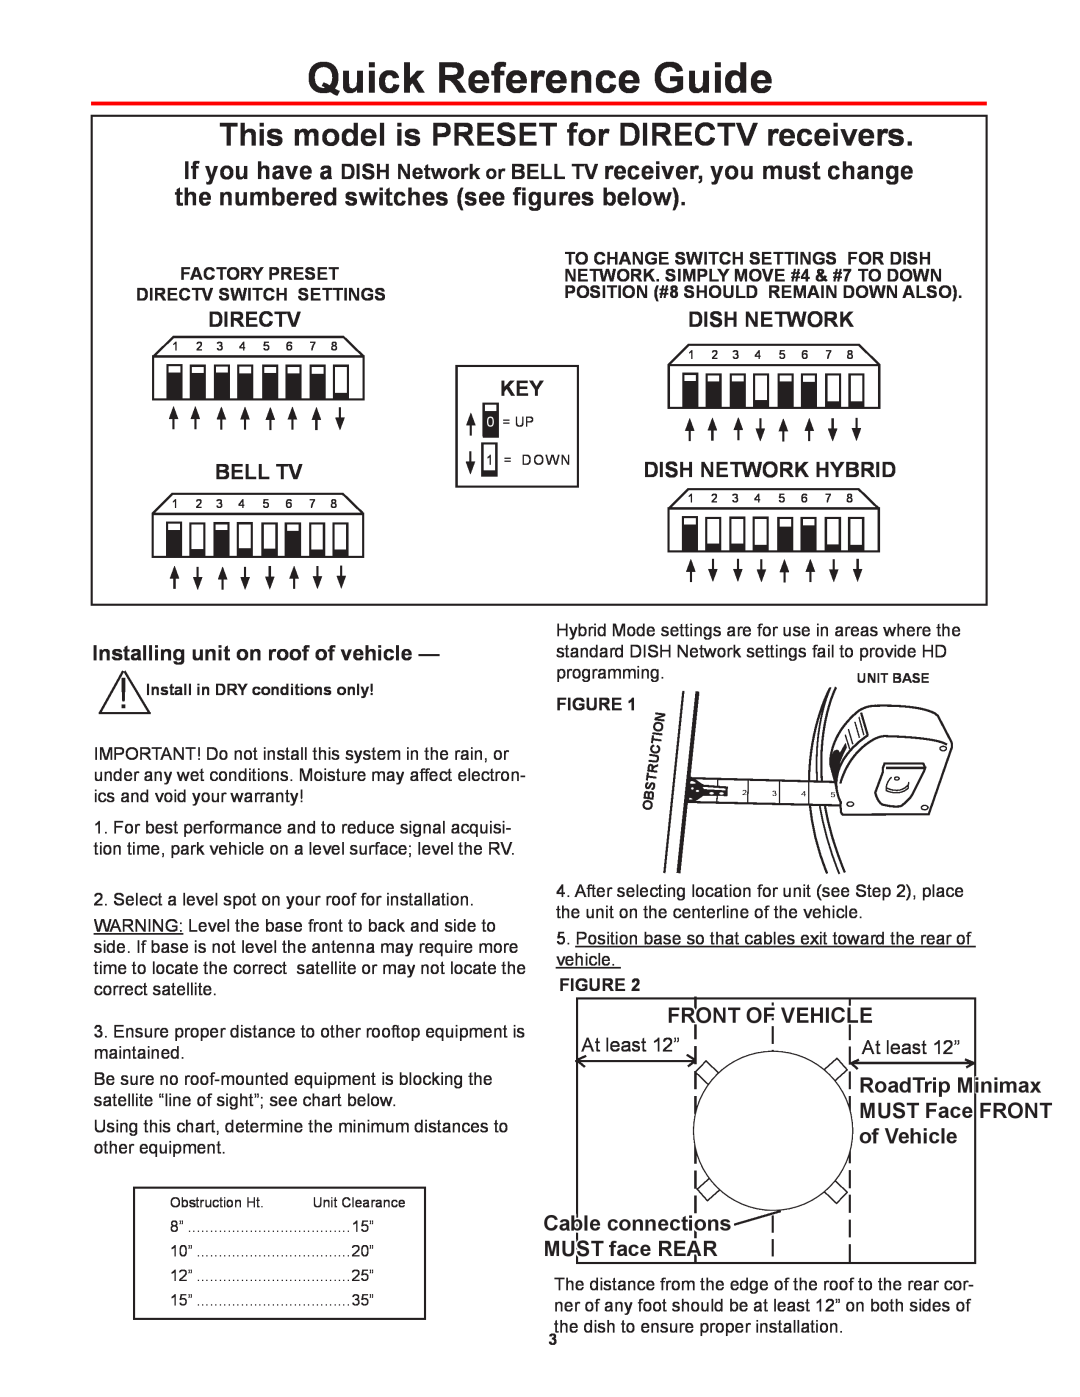 Winegard RTS-80W, RT8035S, RT8000S, RTS-80B manual Quick Reference Guide, This model is PRESET for DIRECTV receivers 